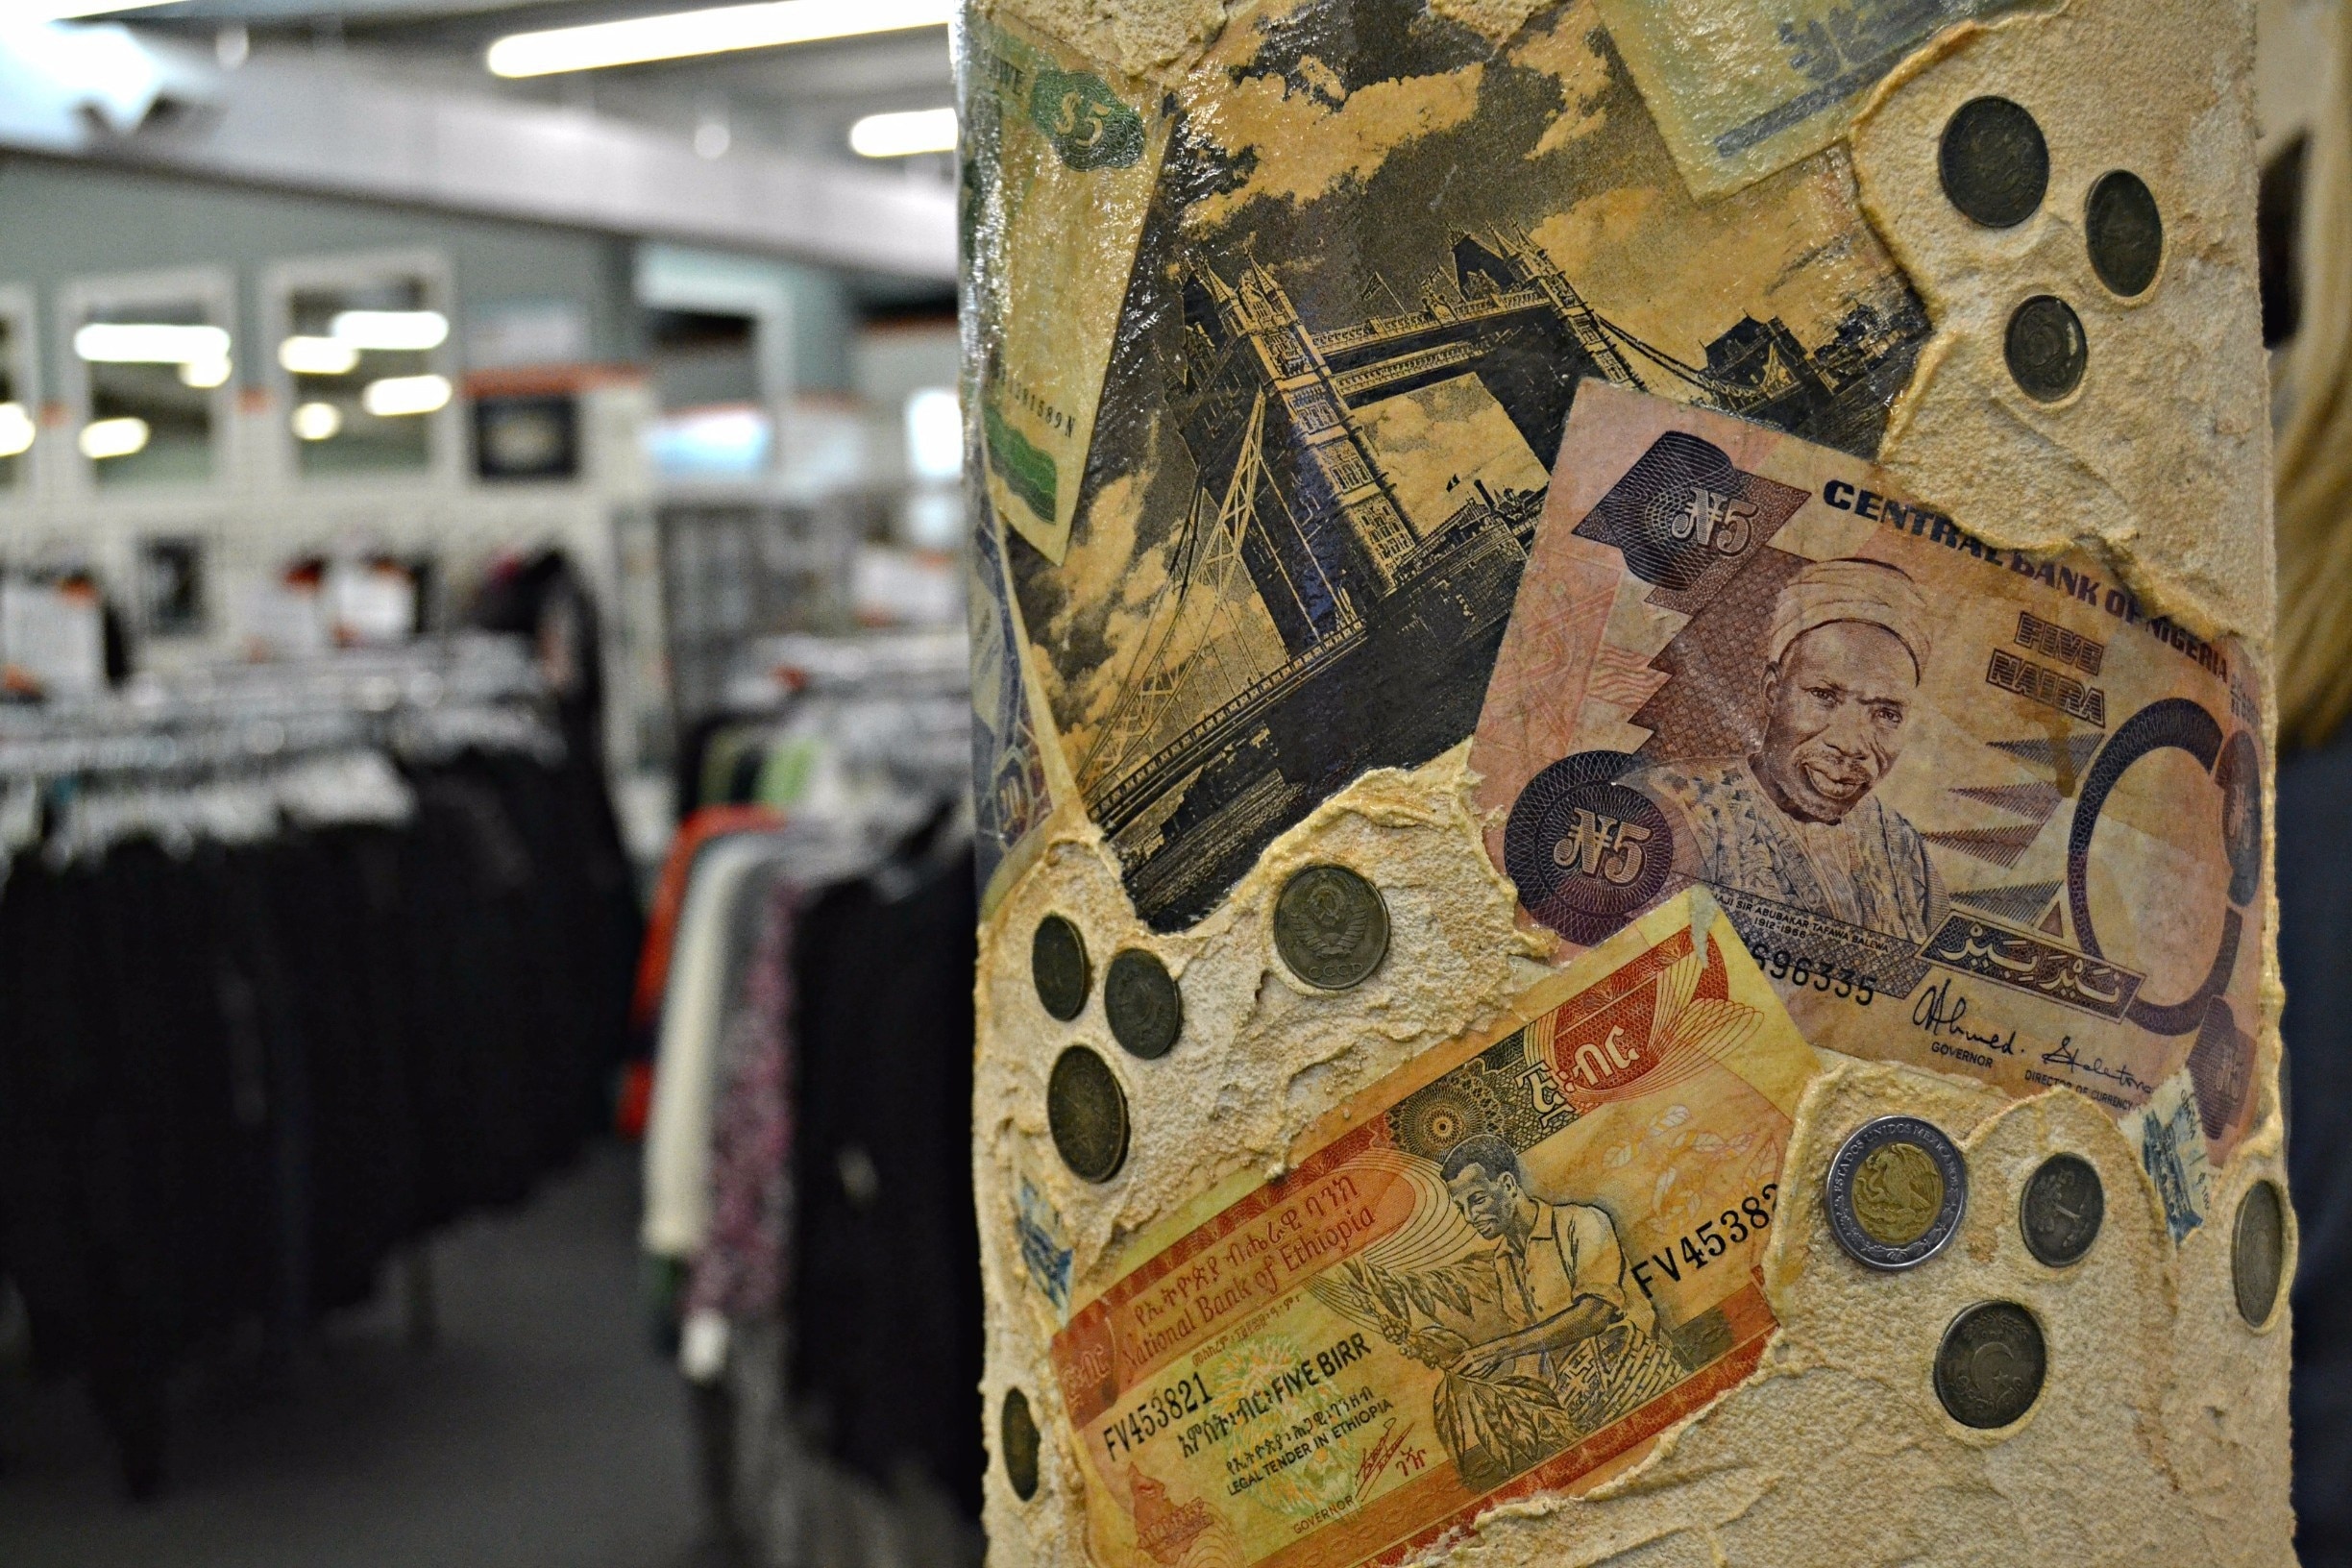 You never know what you will find at Unclaimed Baggage Center in Alabama.  It's where the lost luggage in the United States ends up.  

Read more about it here:  http://www.southernkissed.com/a-world-of-treasures-in-alabama-at-the-unclaimed-baggage-center/